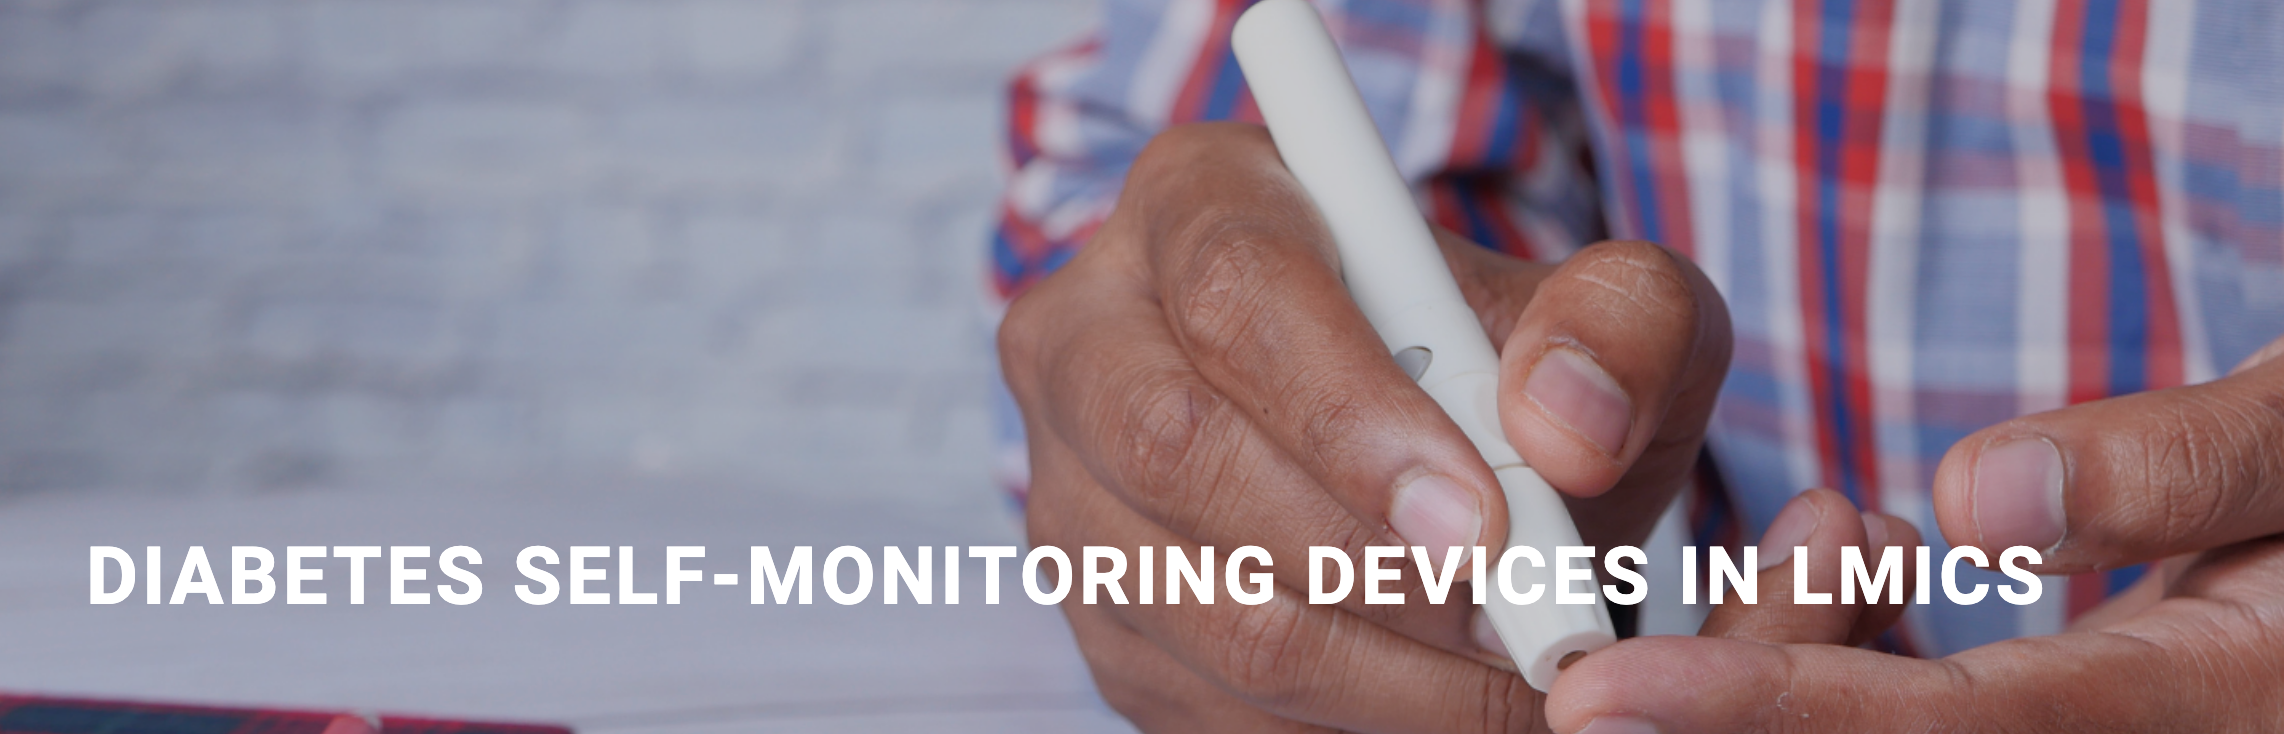 Diabetes Self-Monitoring Devices in LMICs